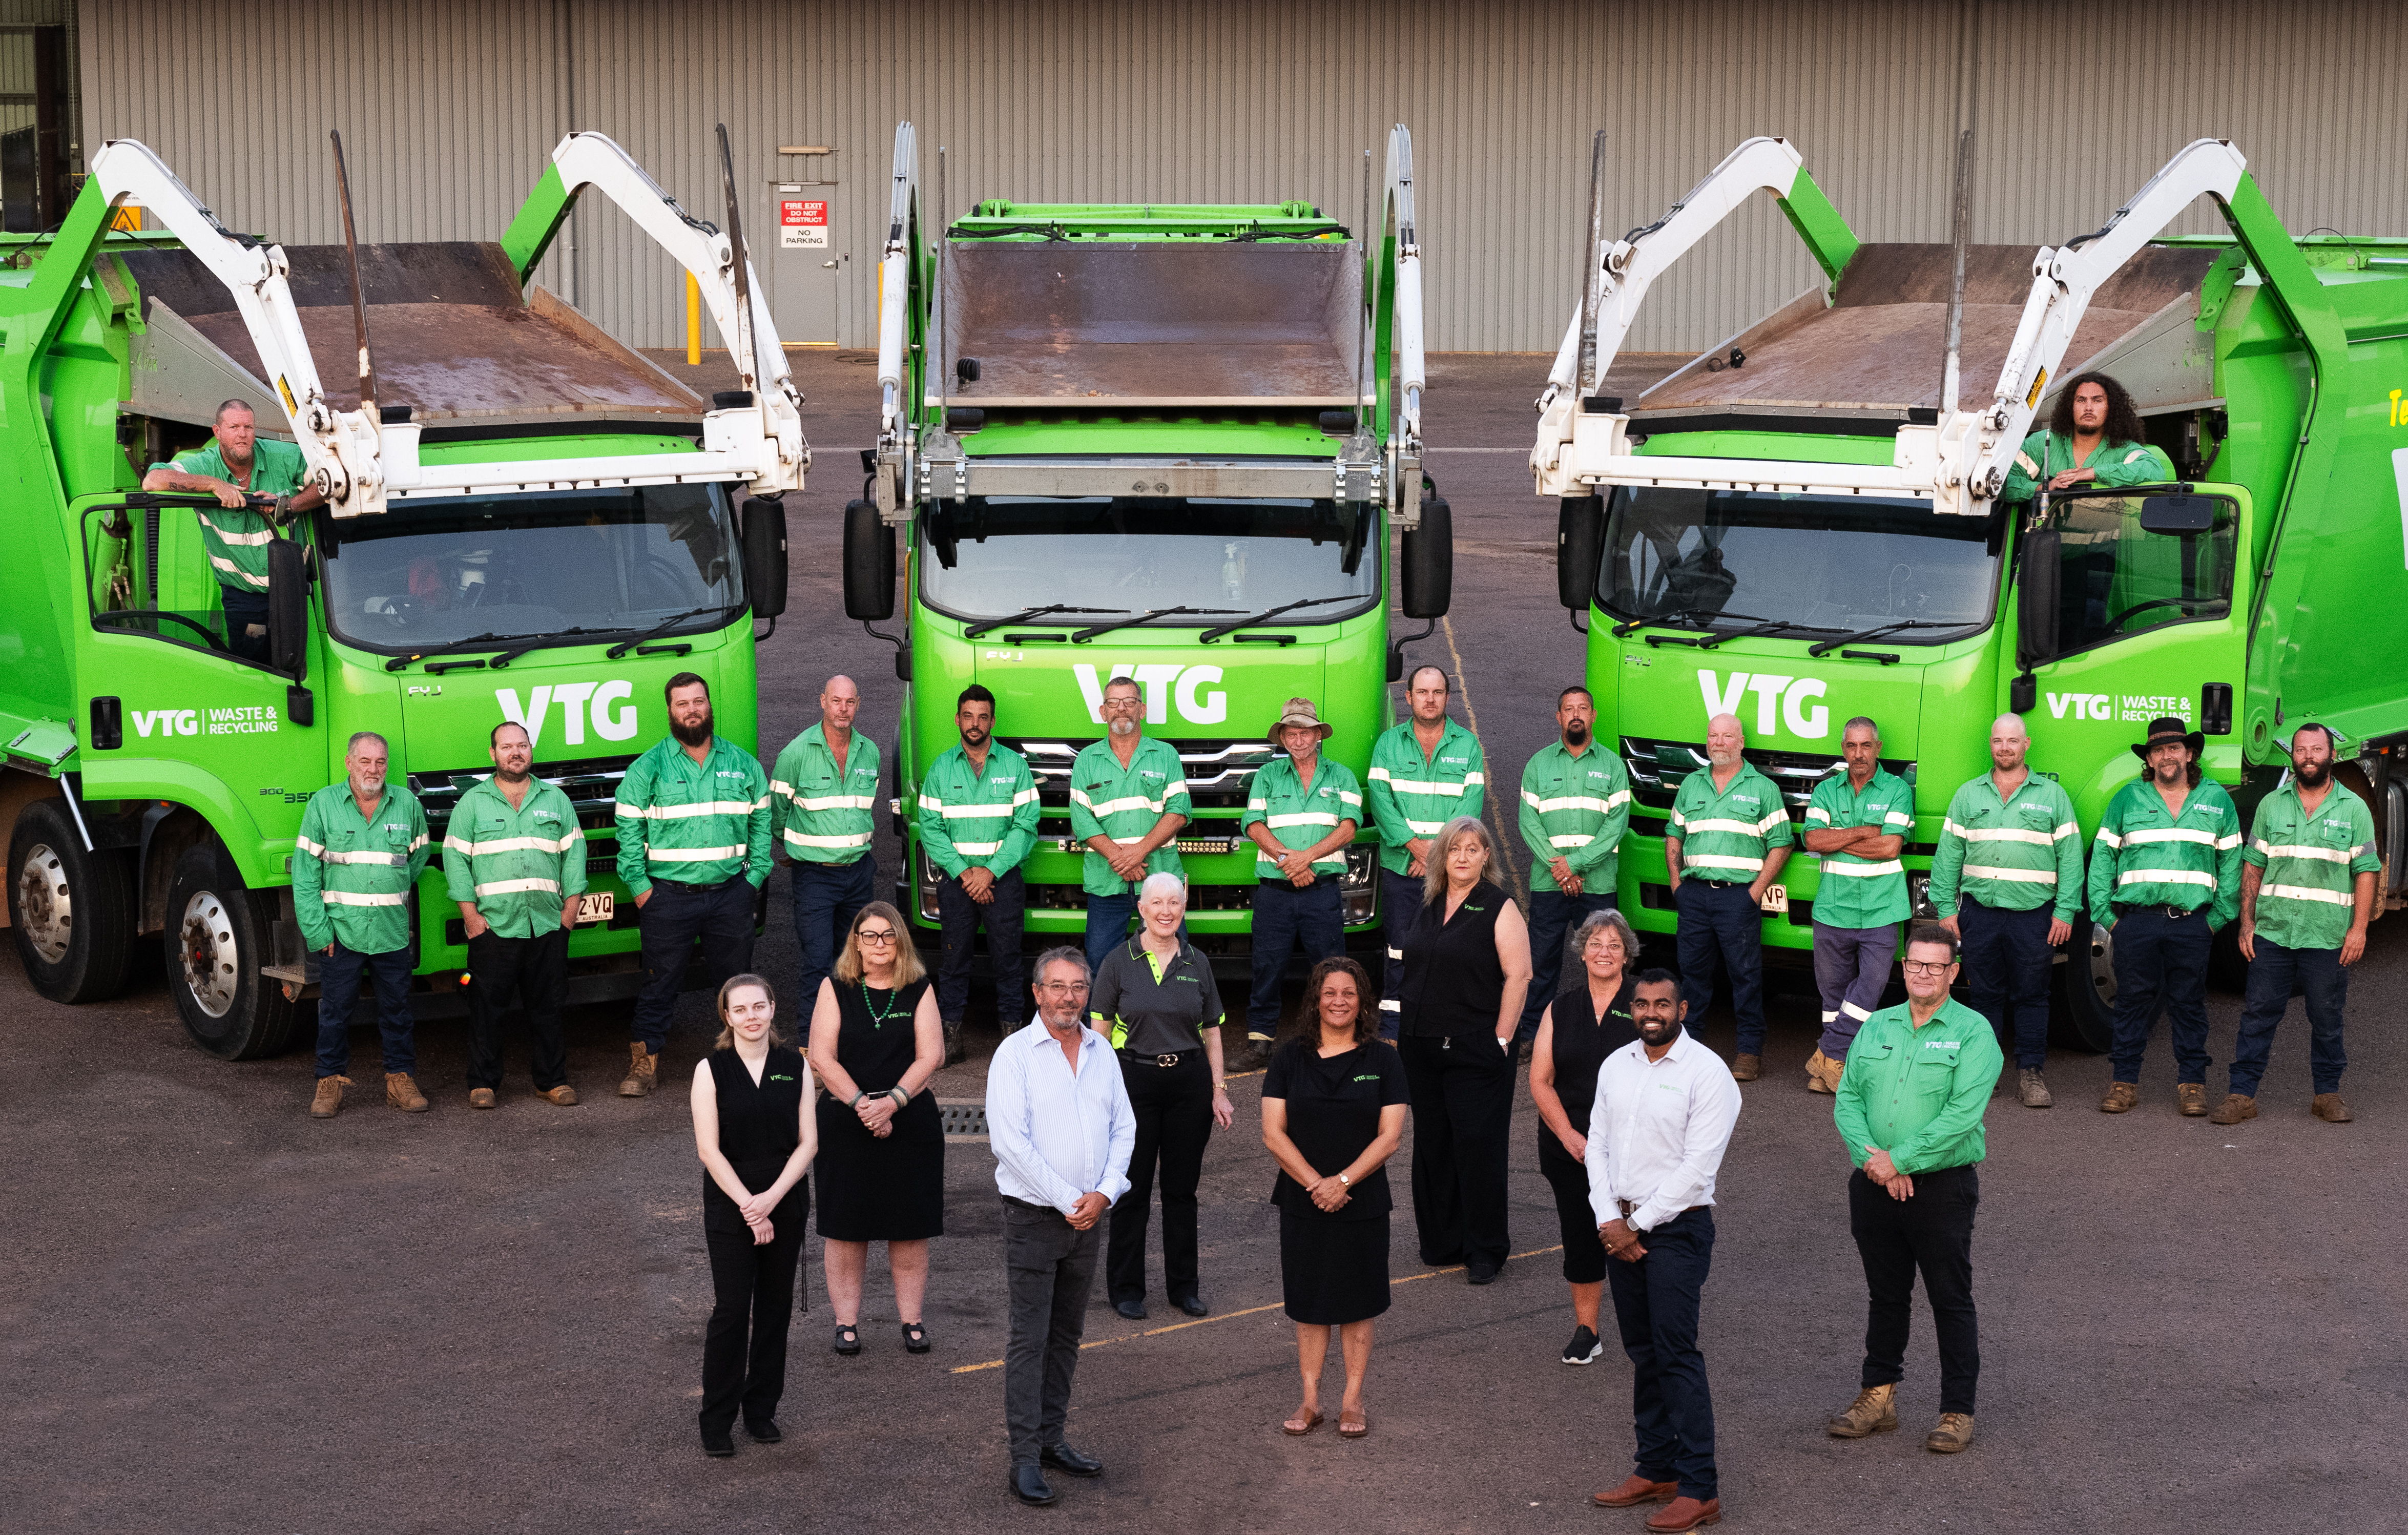 Director Mark Sweet (front left) with Managing Director James Prakash (front right) and the VTG Waste & Recycling team proudly present their fleet